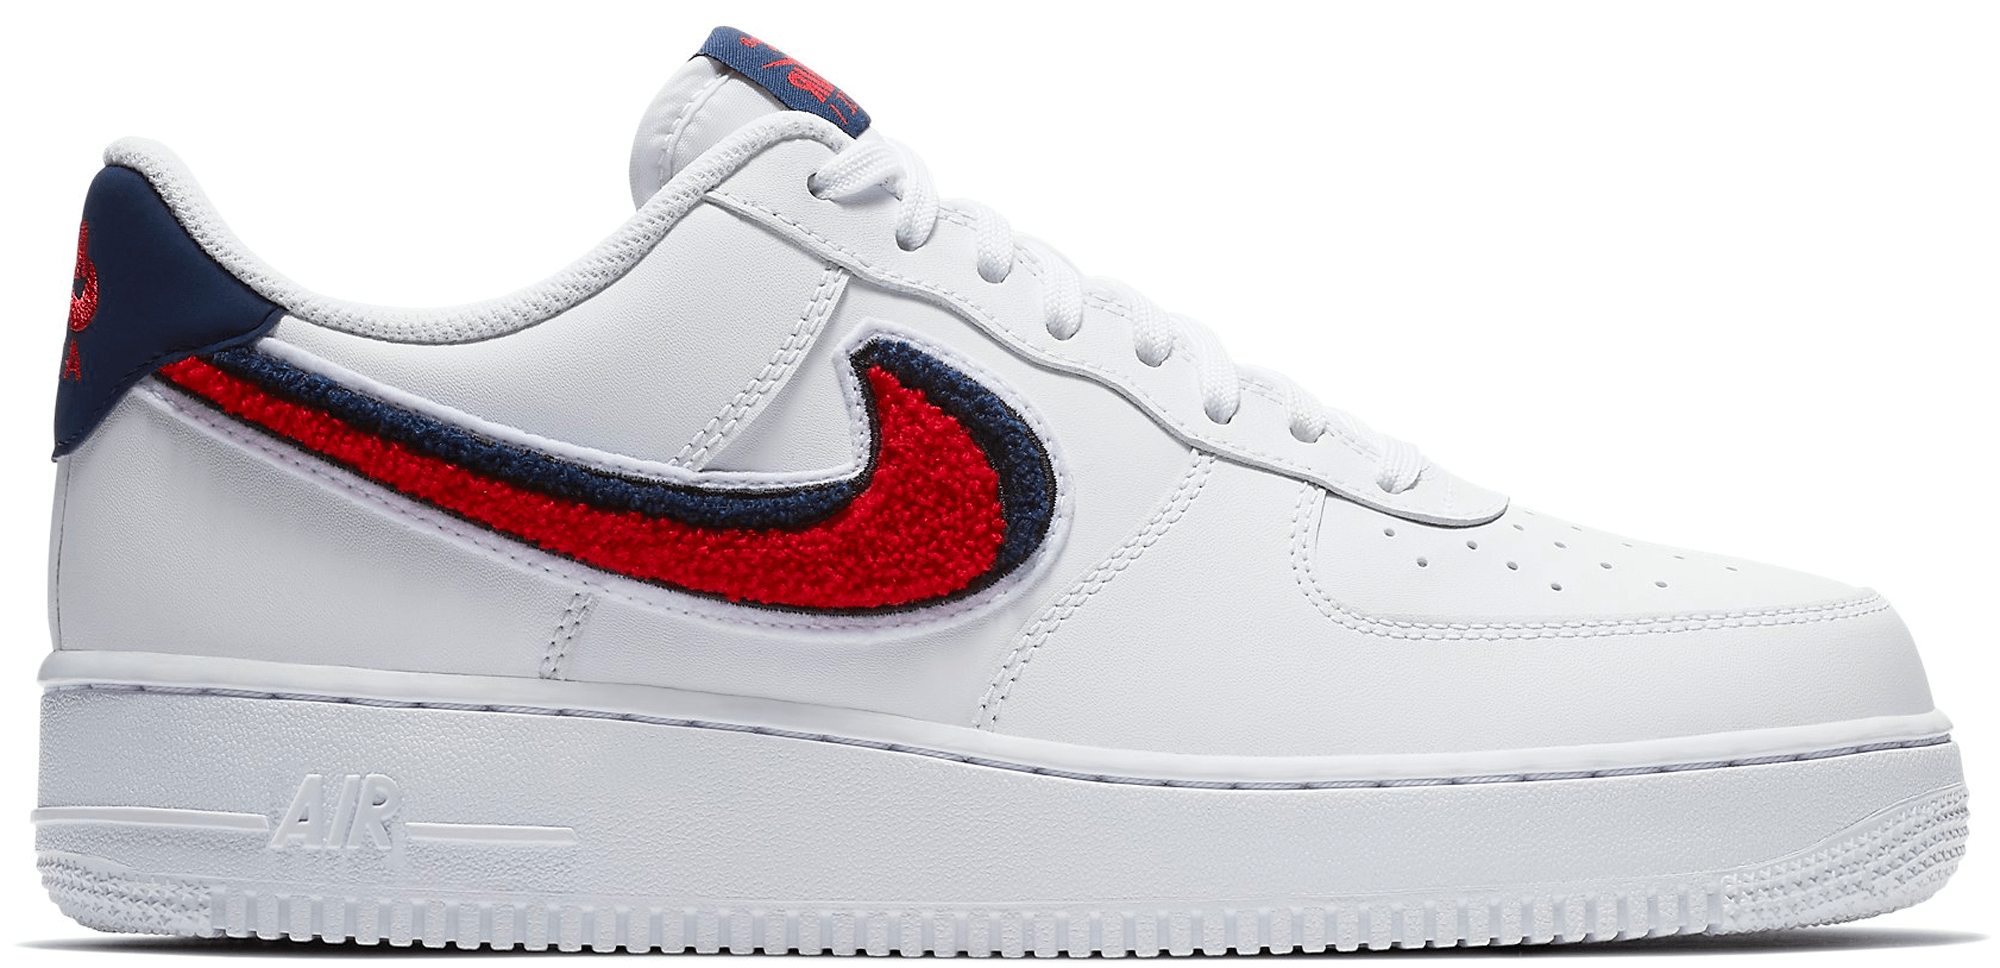 Red and Blue Shoes Logo - White And Red High Top Nike Shoes